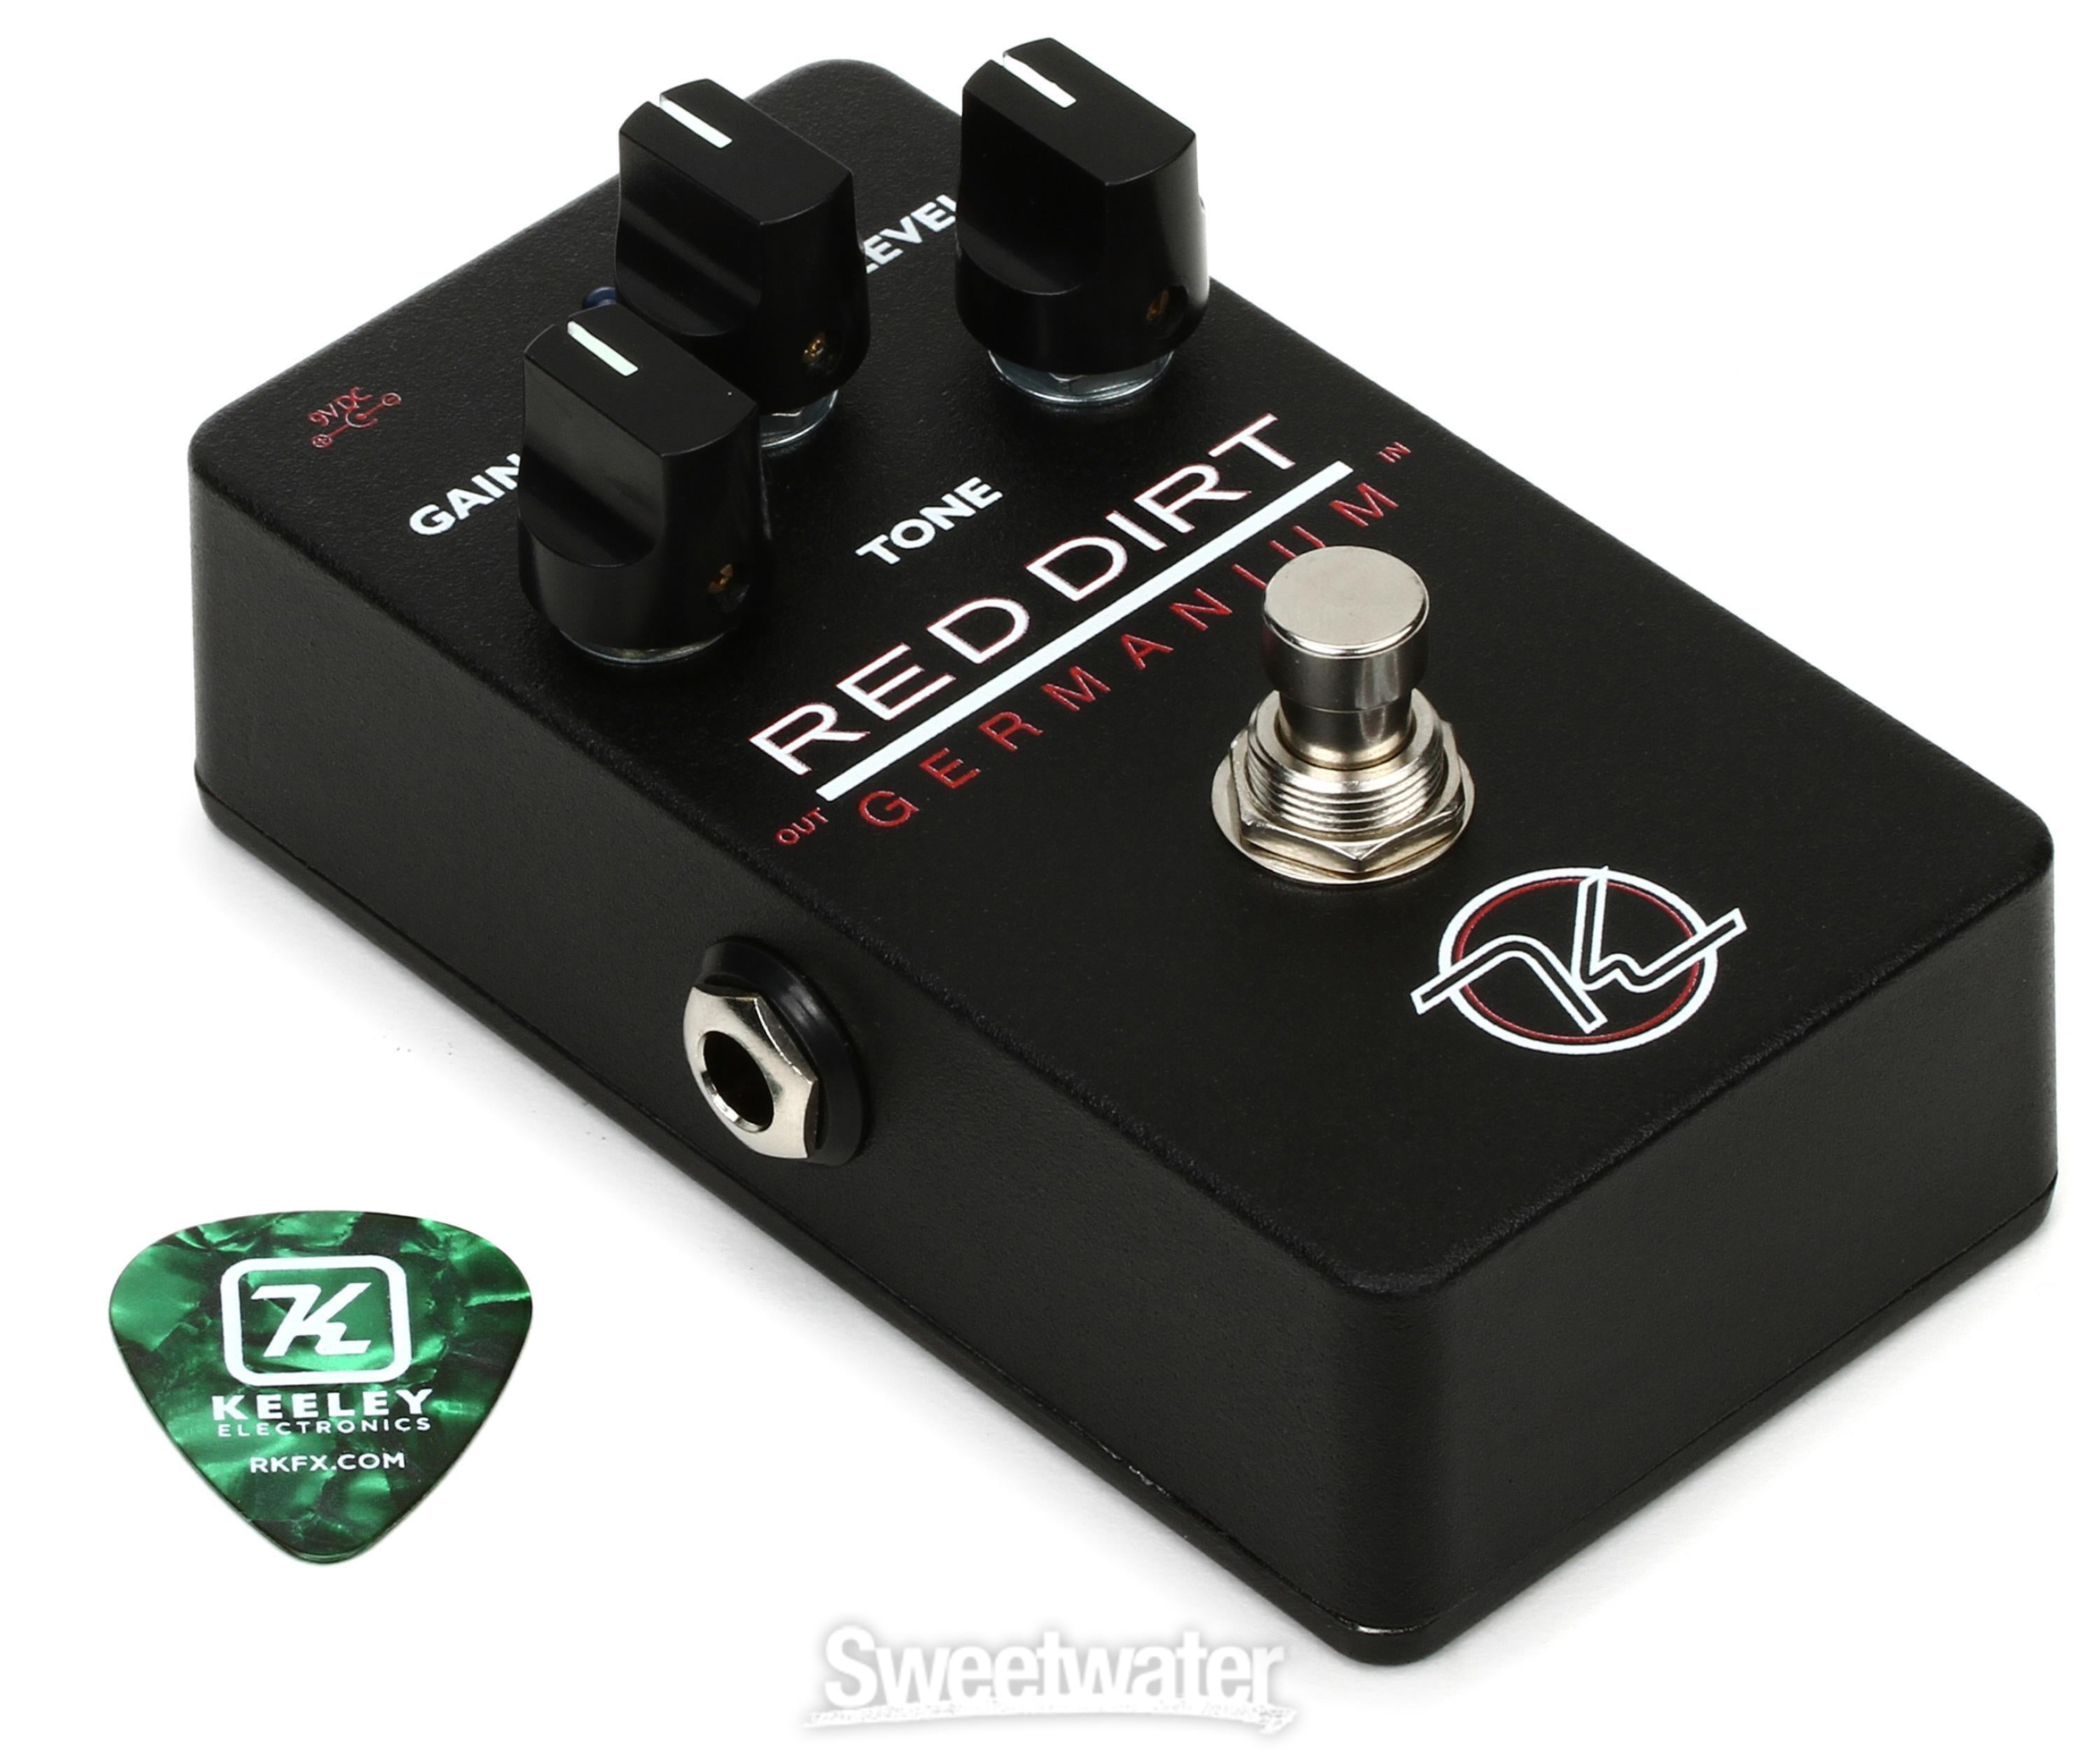 Keeley Red Dirt Germanium Overdrive Pedal Reviews | Sweetwater